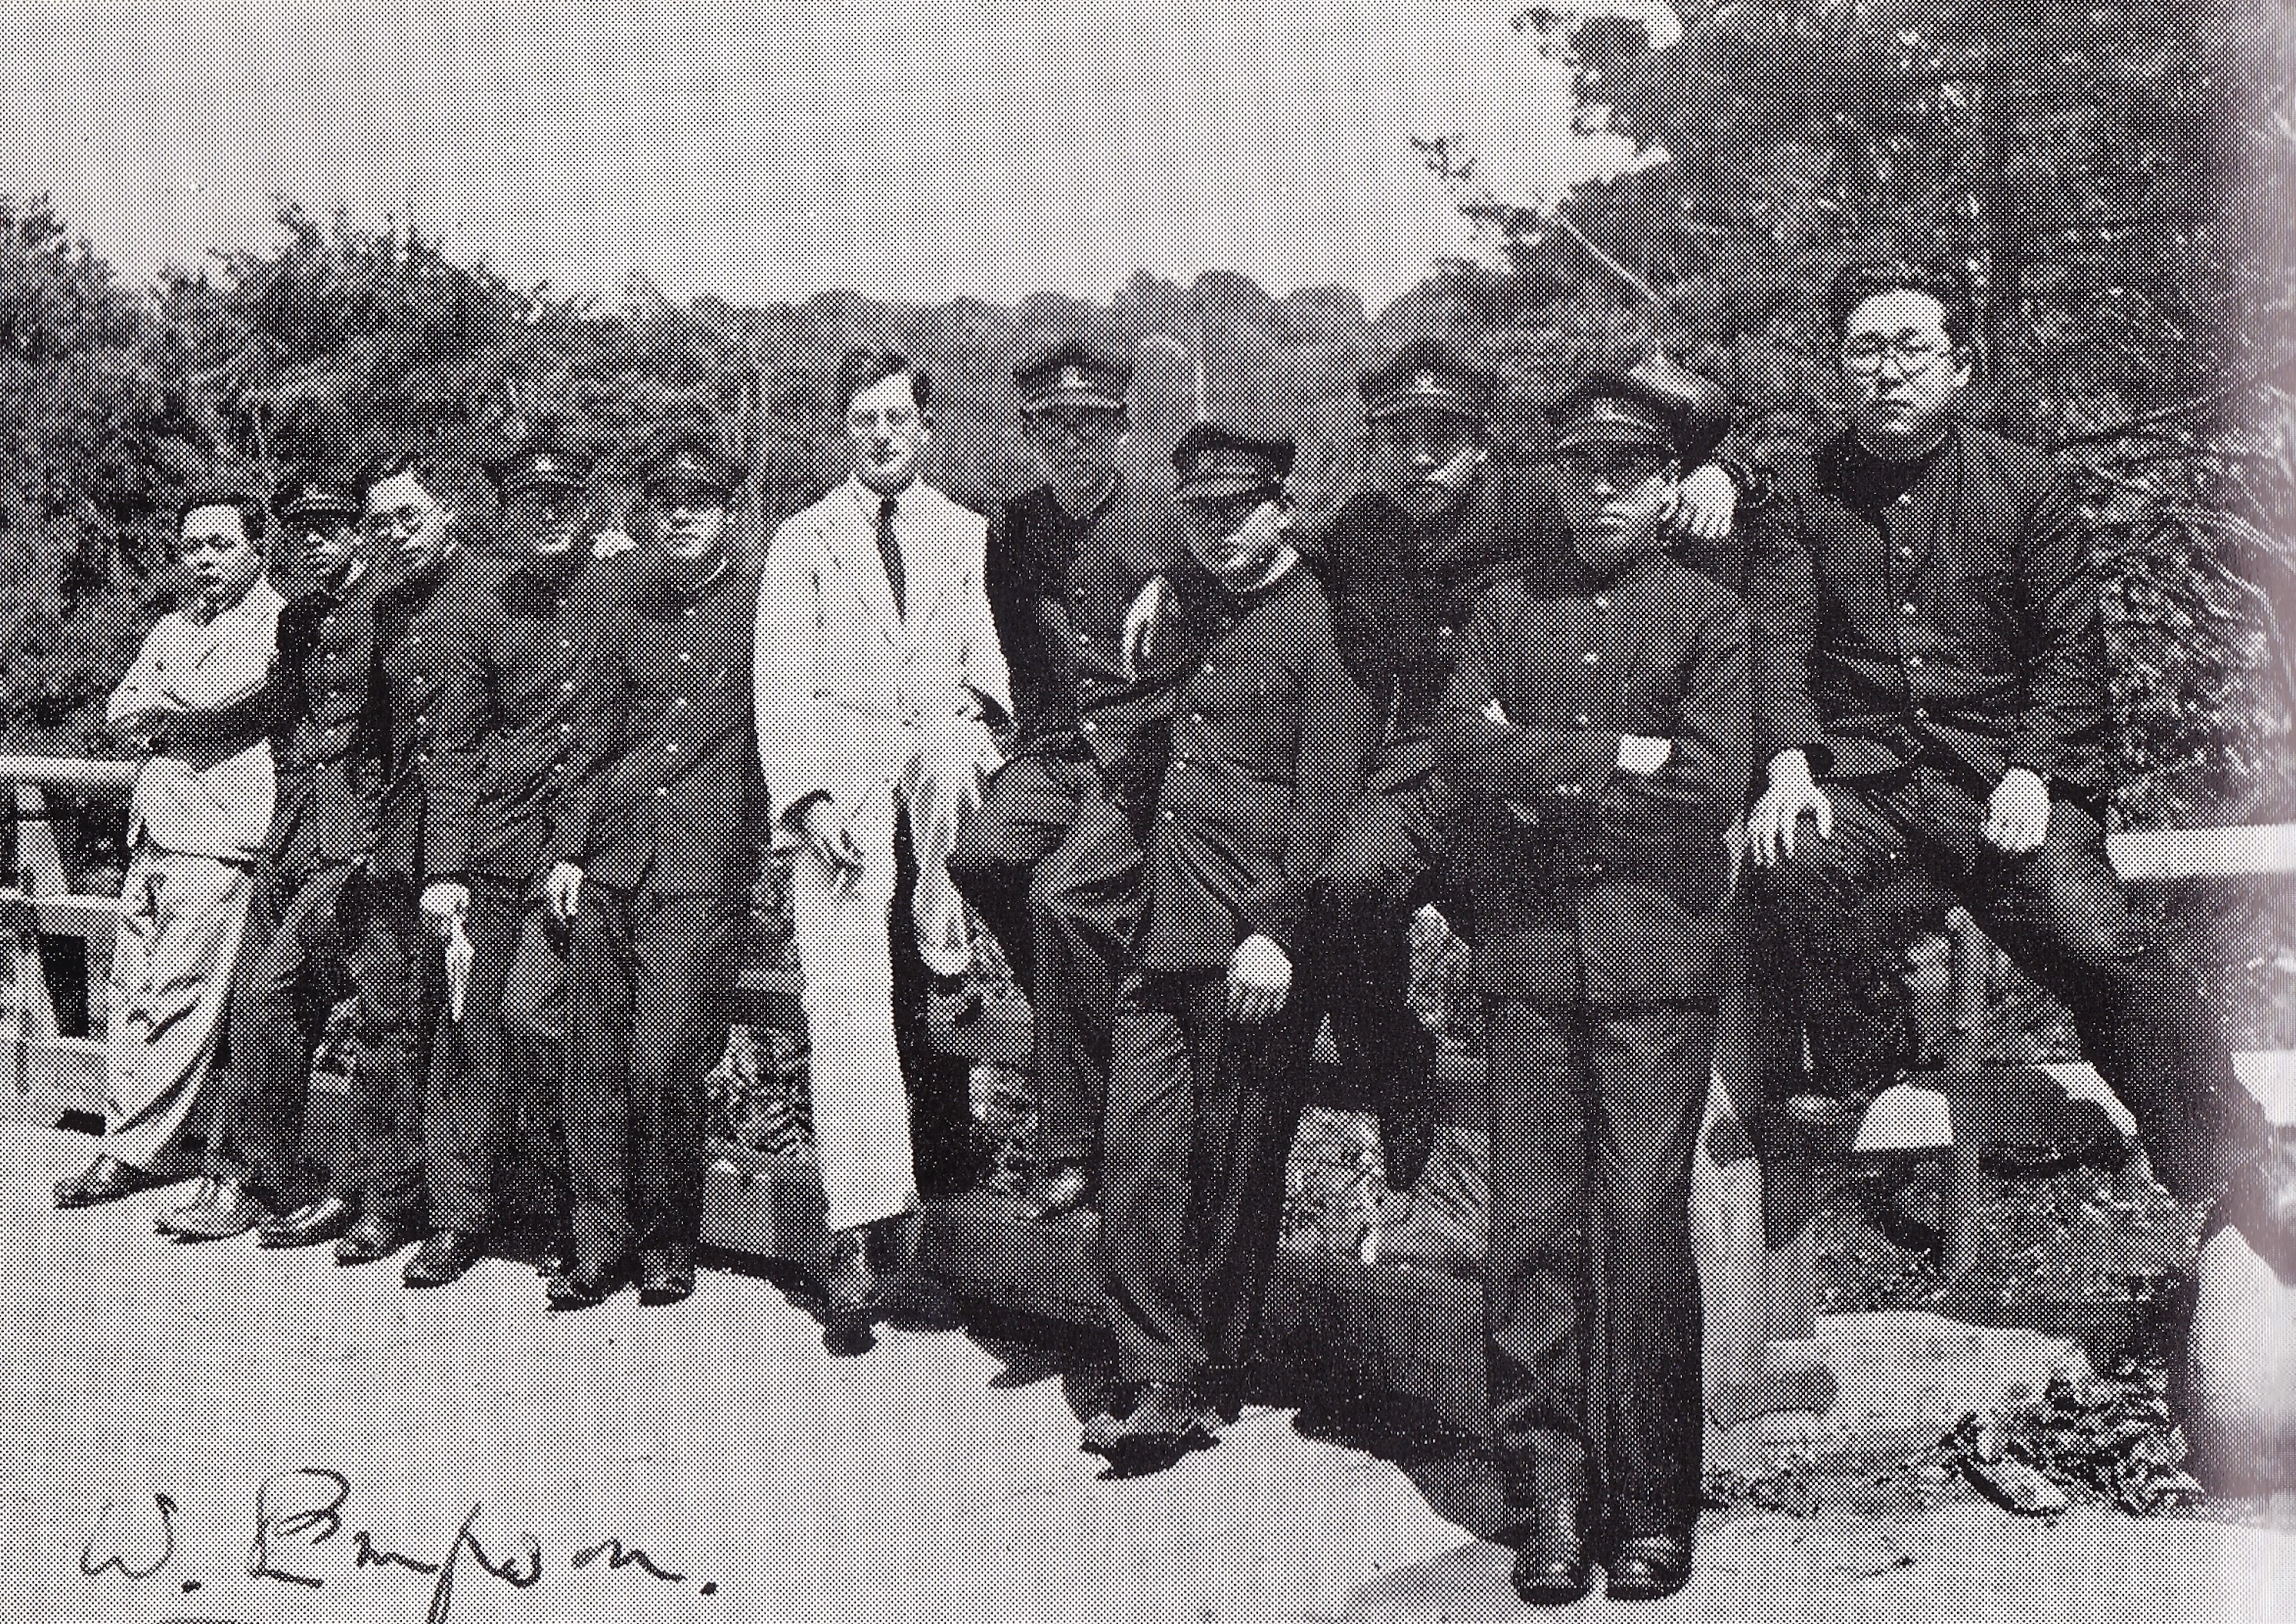 William Empson with Tokyo Bunrika University students, probably 1932, at Senshuen (占春園), a garden in modern day Bunkyō-ku, Tokyo, then part of the grounds of Bunrika University, Empson's colleague and friend Fukuhara Rintarō far left. We are grateful to Kenkyūsha for permission to reproduce the image from Fukuhara's collected writings, 『英文学評論』/『福原麟太郎著作集』10 (東京：研究社, 1969). (Image sourced by David Ewick/Kano Takeda)